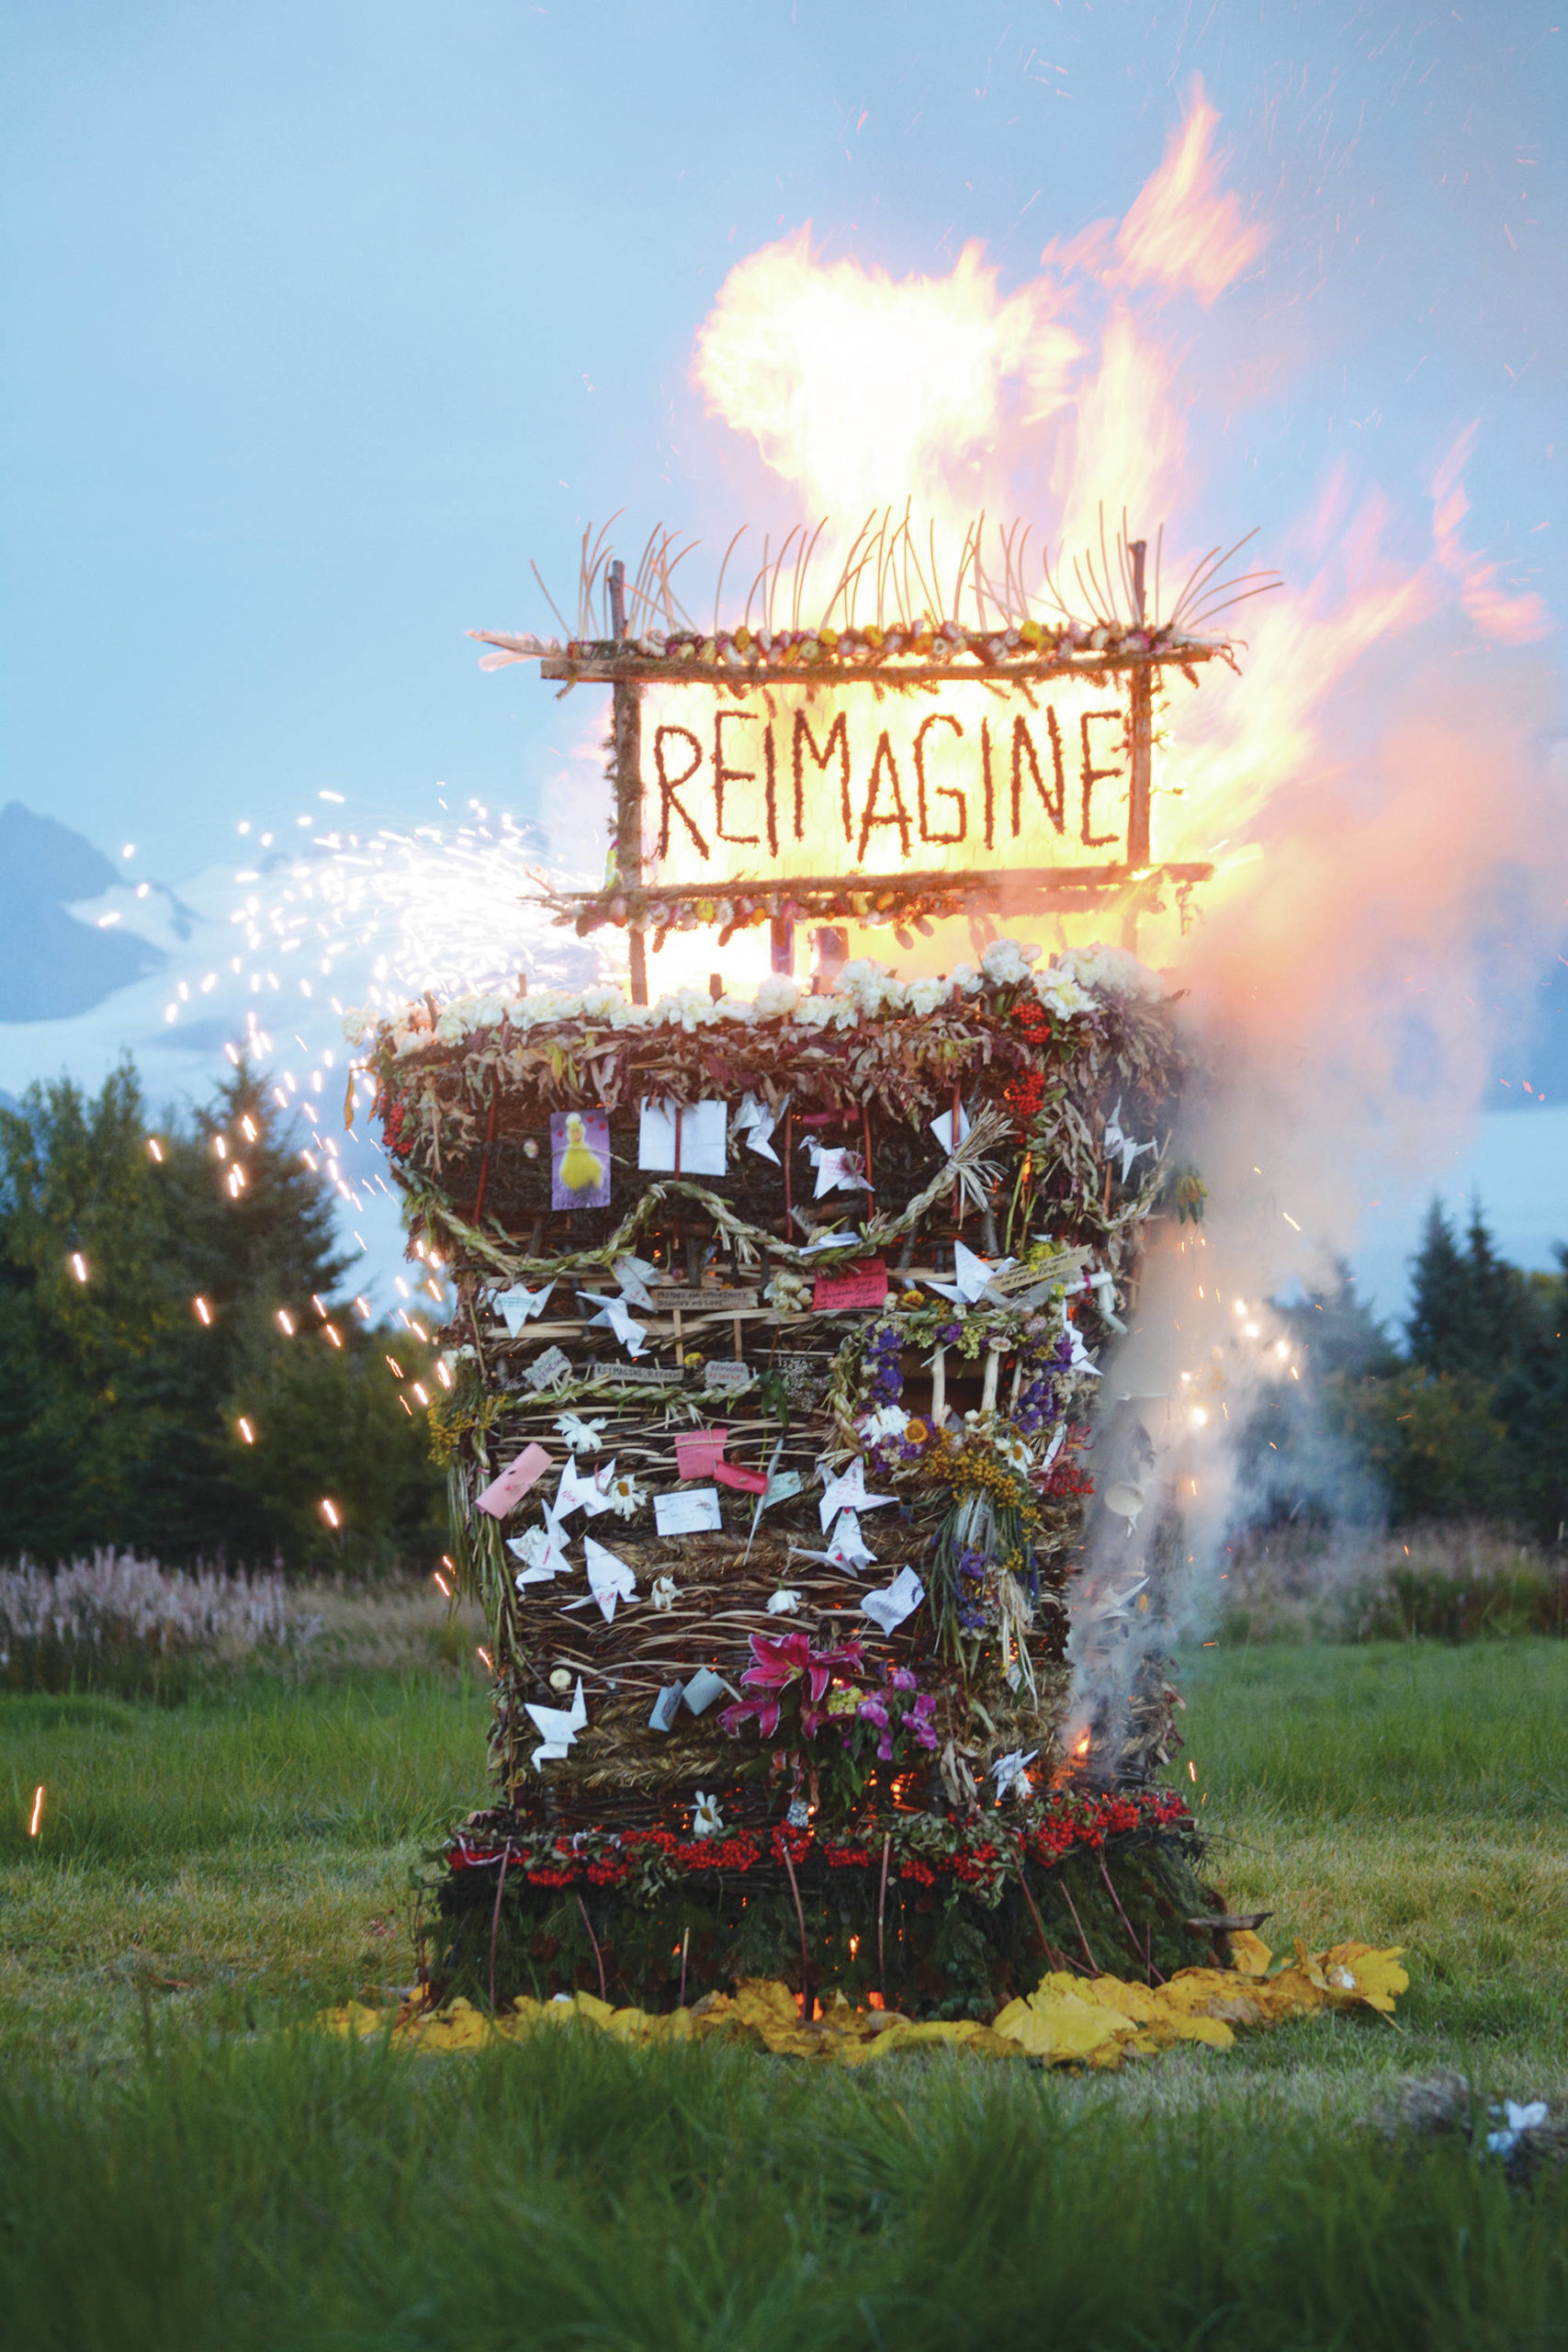 “Reimagine,” the 17th annual Burning Basket, catches fire in a field on Sunday, Sept. 13, near Homer. Artist Mavis Muller intended to broadcast live on Facebook and YouTube the burning of the basket, but because of technical difficulties that didn’t happen. “Burning Basket teaches how to let go of expectations and accept the present moment,” Muller wrote in a text message. “Technology is fickle. The basket, however, did exactly what it promised to do. It helod our collective burderns, our memorials, our joys, sadness, fear, and dispersed all of our good intentions in a plume of smoke, sparks and flames.” (Photo by Michael Armstrong/Homer News)